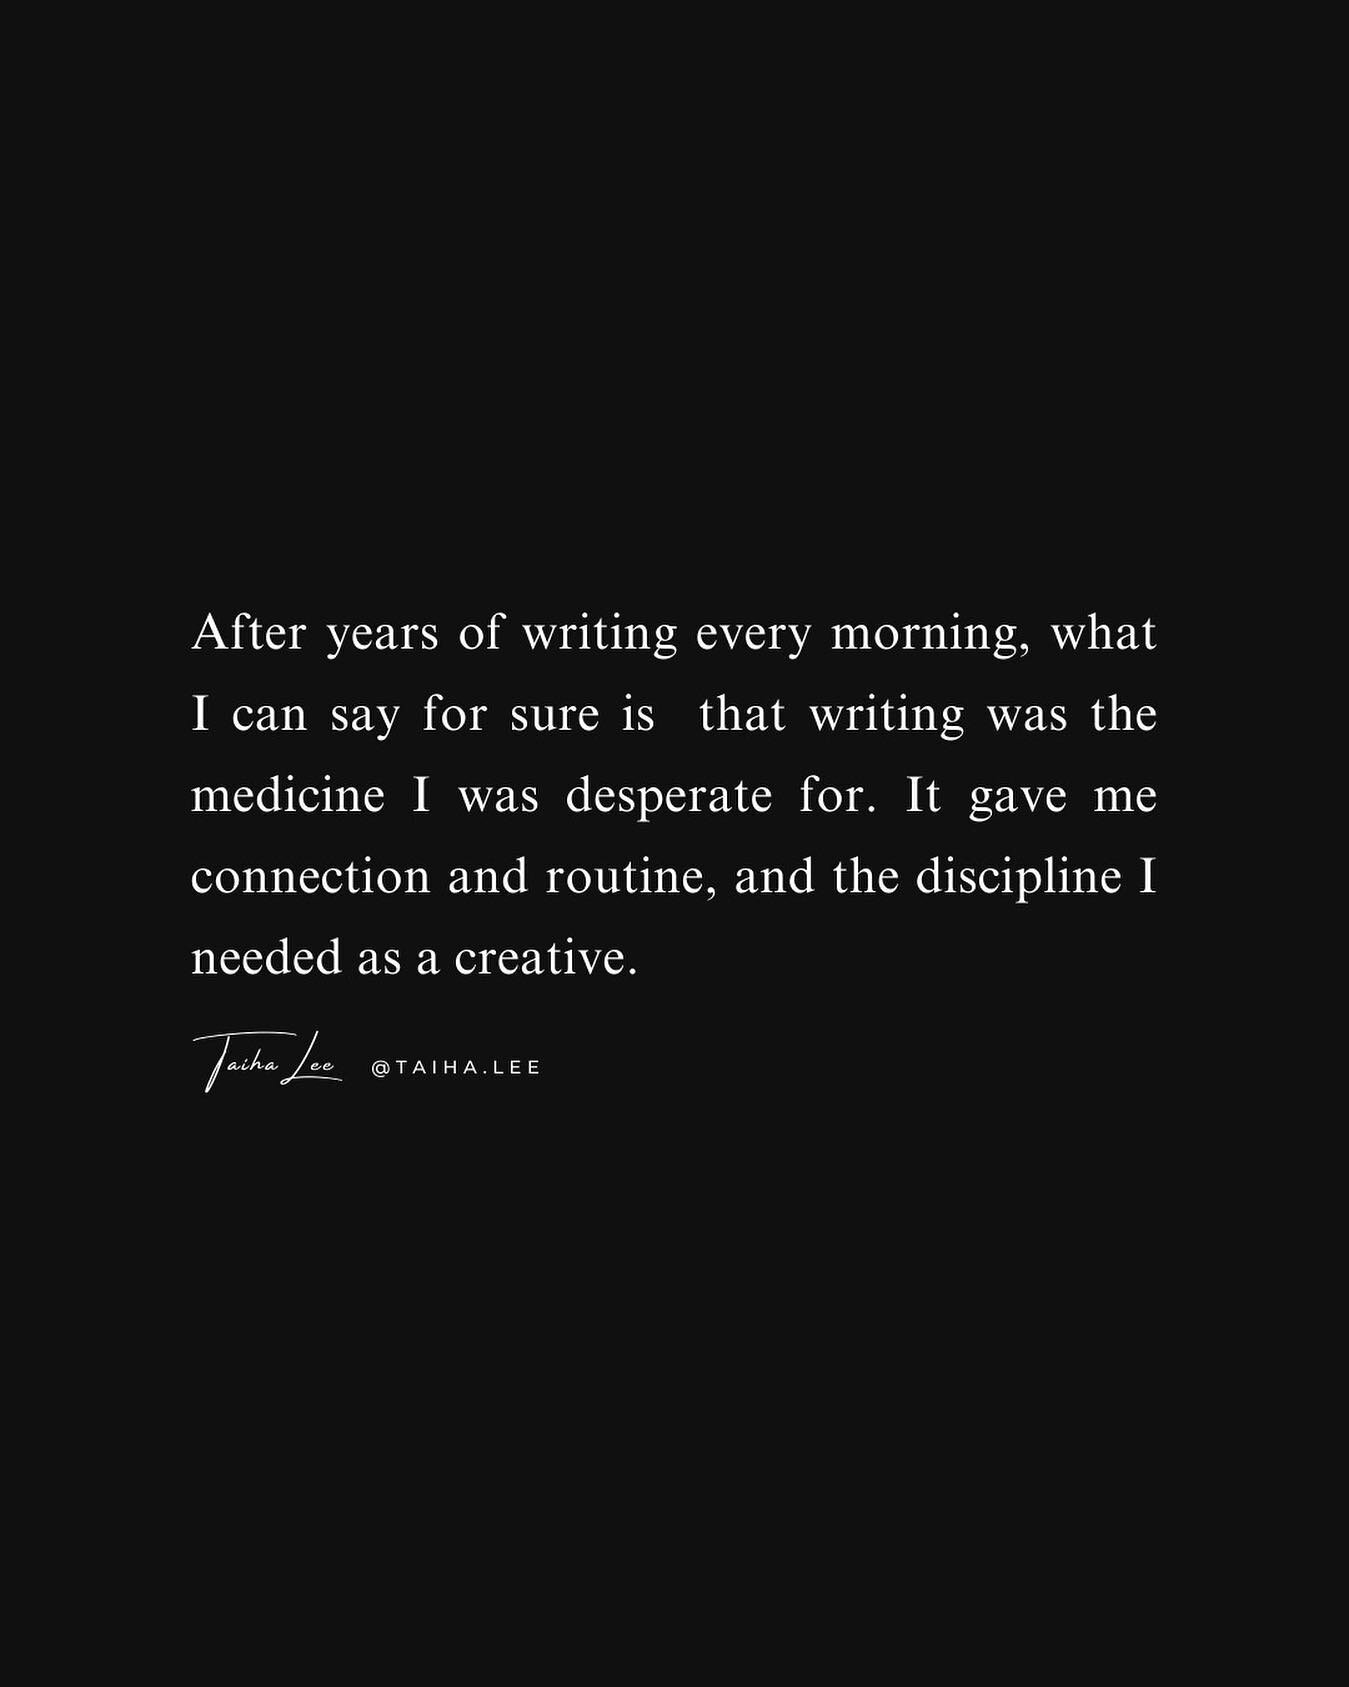 After years of writing every morning, what I can say for sure is that writing was the medicine I was desperate for. It gave me connection and routine, and the discipline I needed as a creative. 
⠀⠀⠀⠀⠀⠀⠀⠀⠀
From my book, Waking Up, which is available o